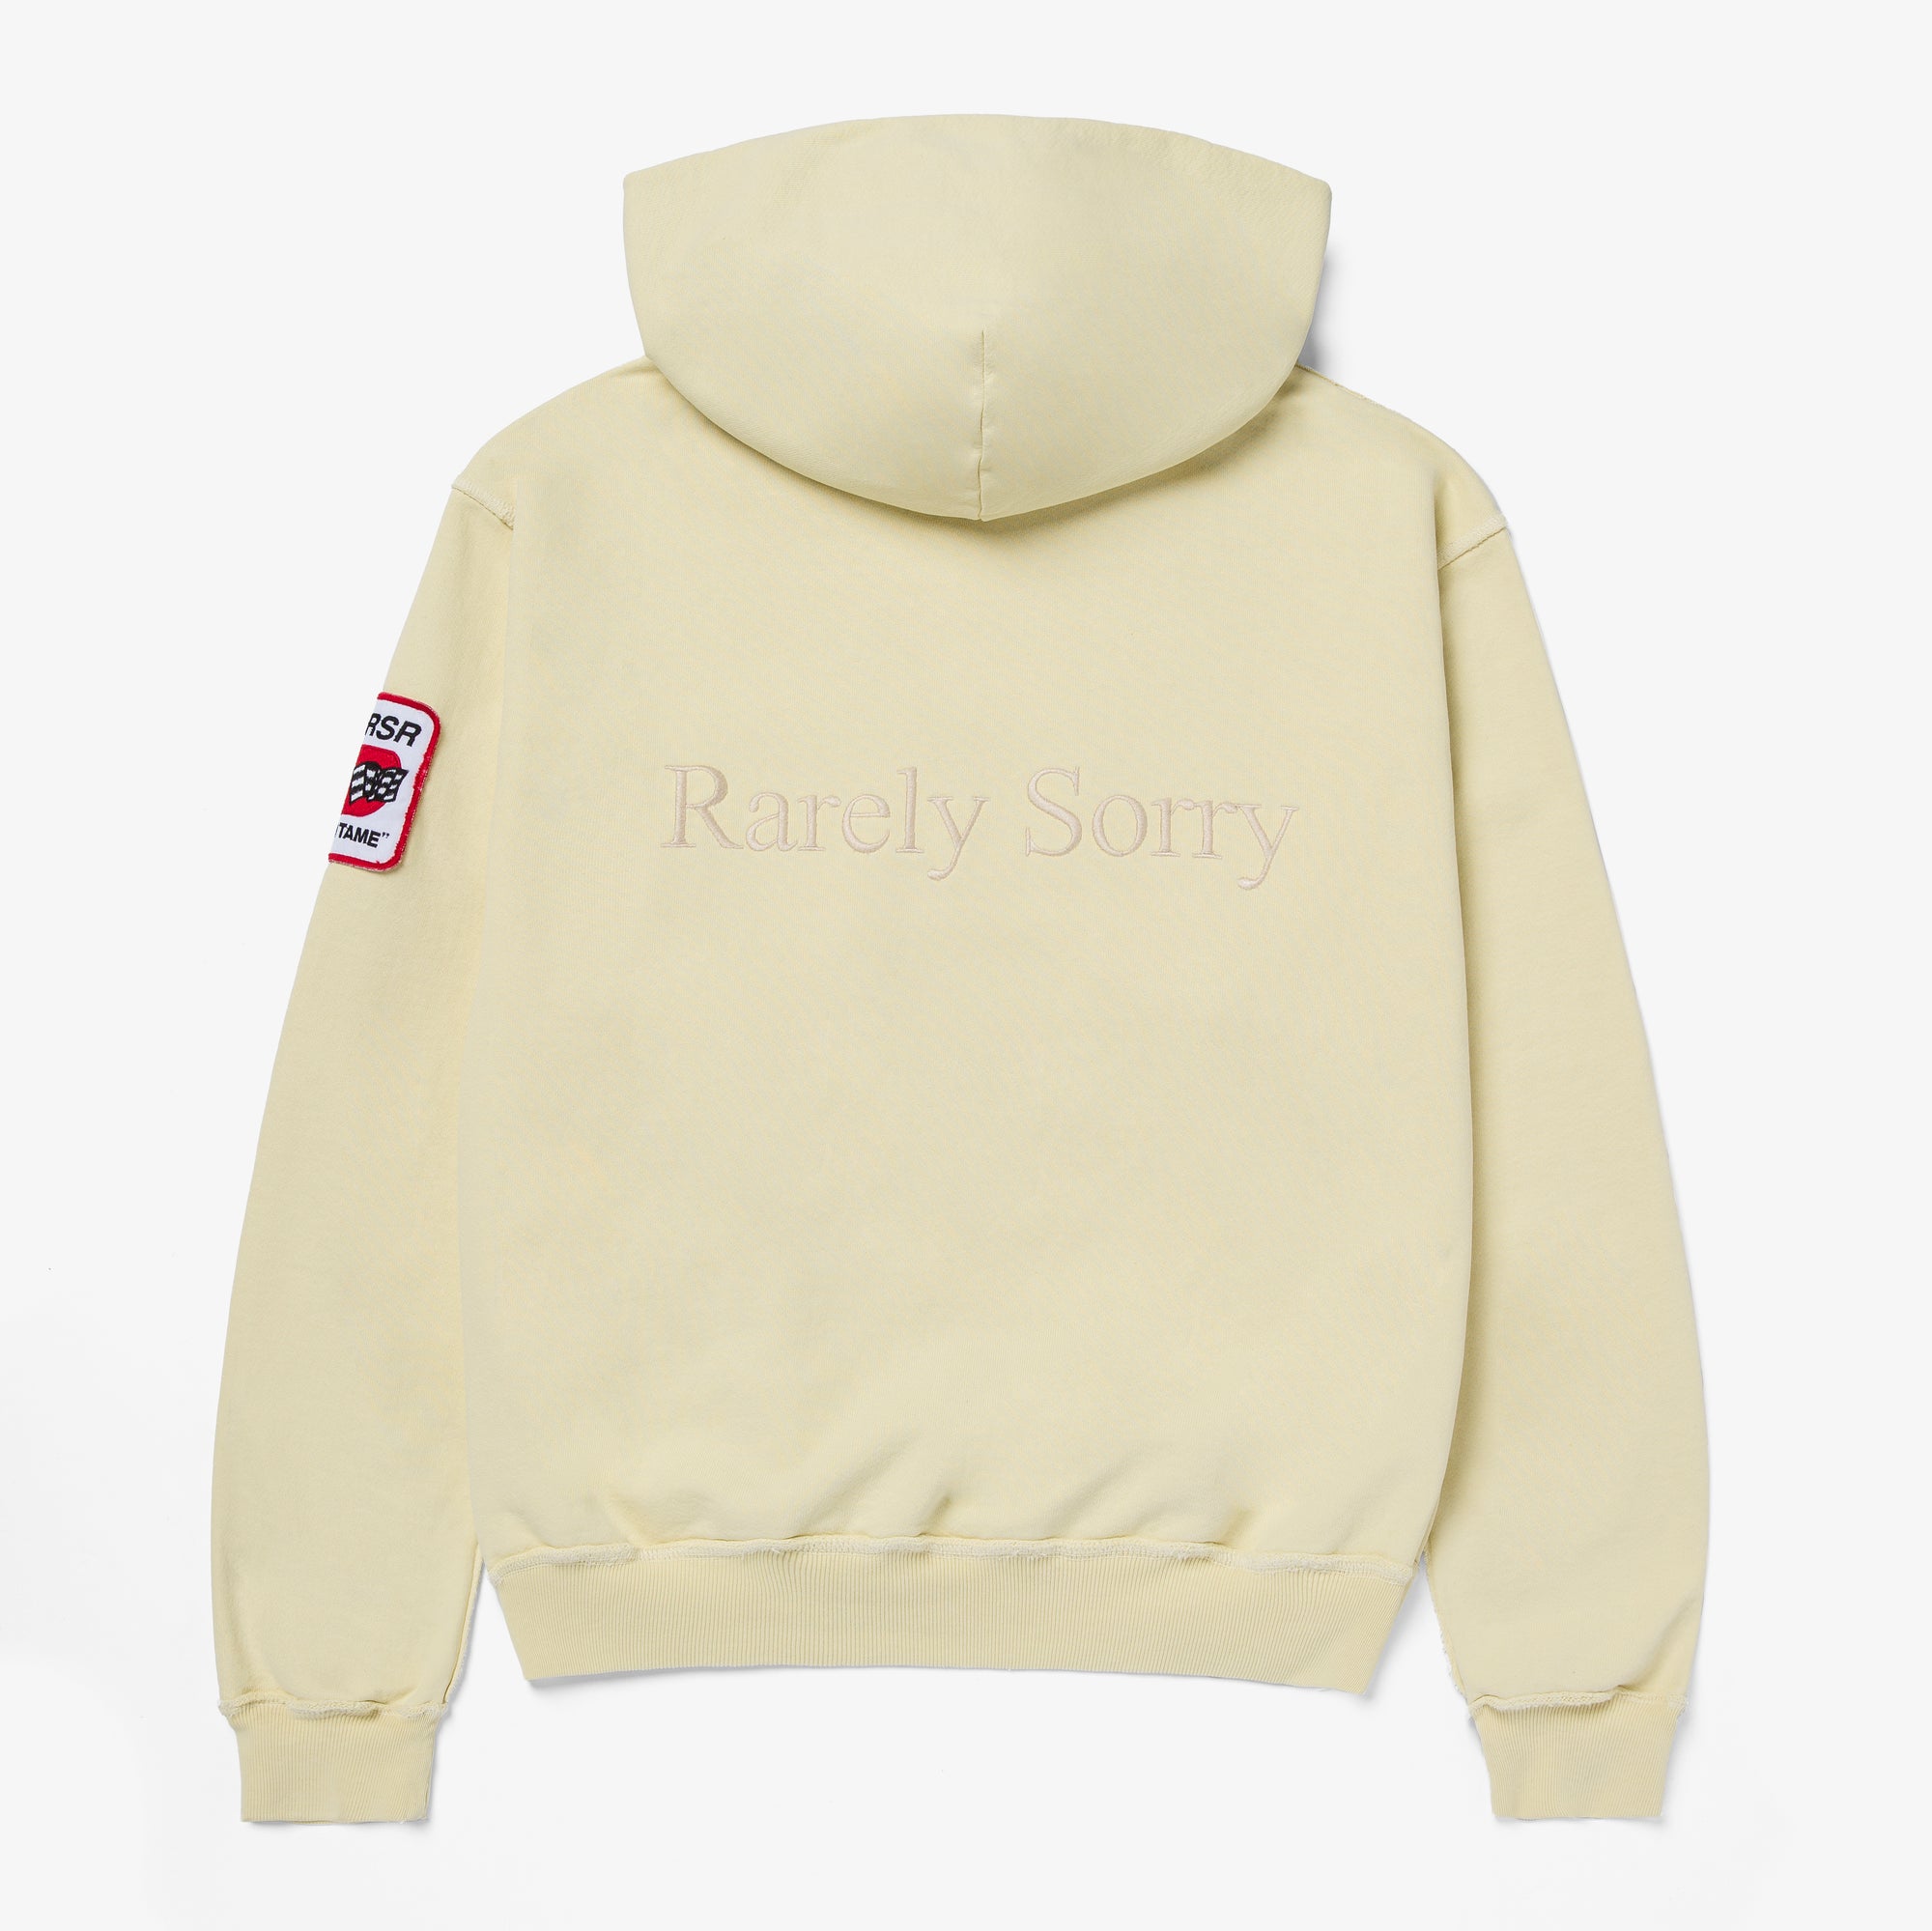 'RARELY SORRY' PATCHES HOODIE, VANILLA YELLOW